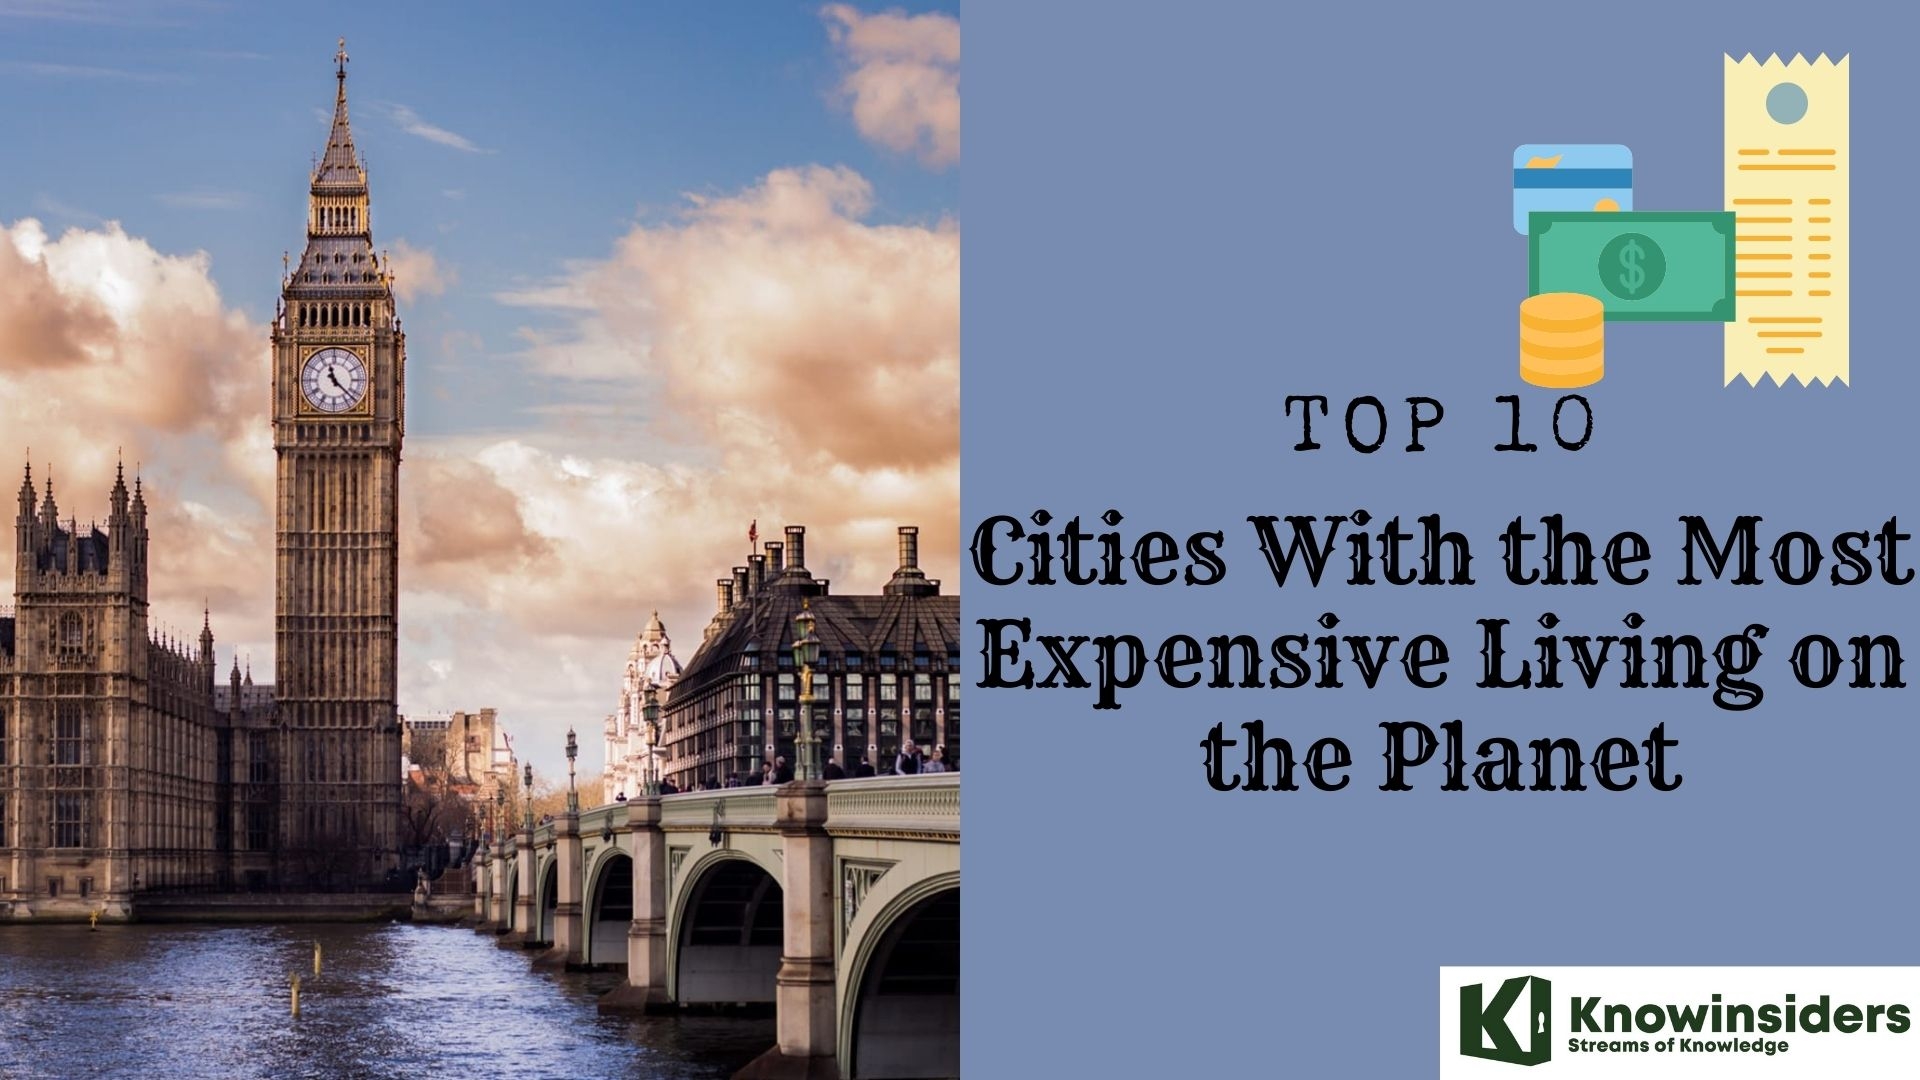 Top 10 Cities With the Most Expensive Living on the Planet